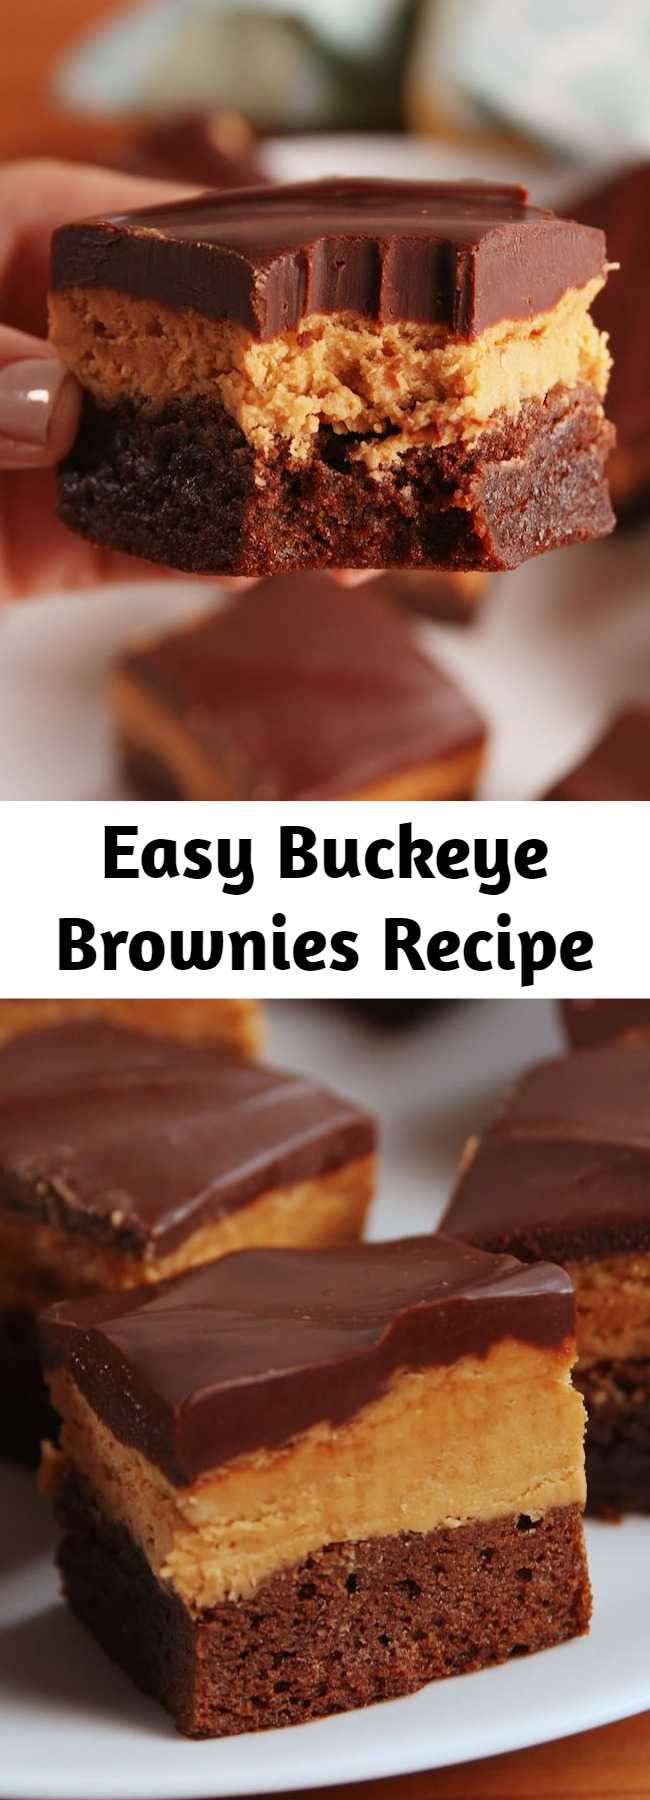 Easy Buckeye Brownies Recipe - We've made A LOT of brownies in our day and these put all others to shame. It's chocolate and peanut butter. What more could you want?